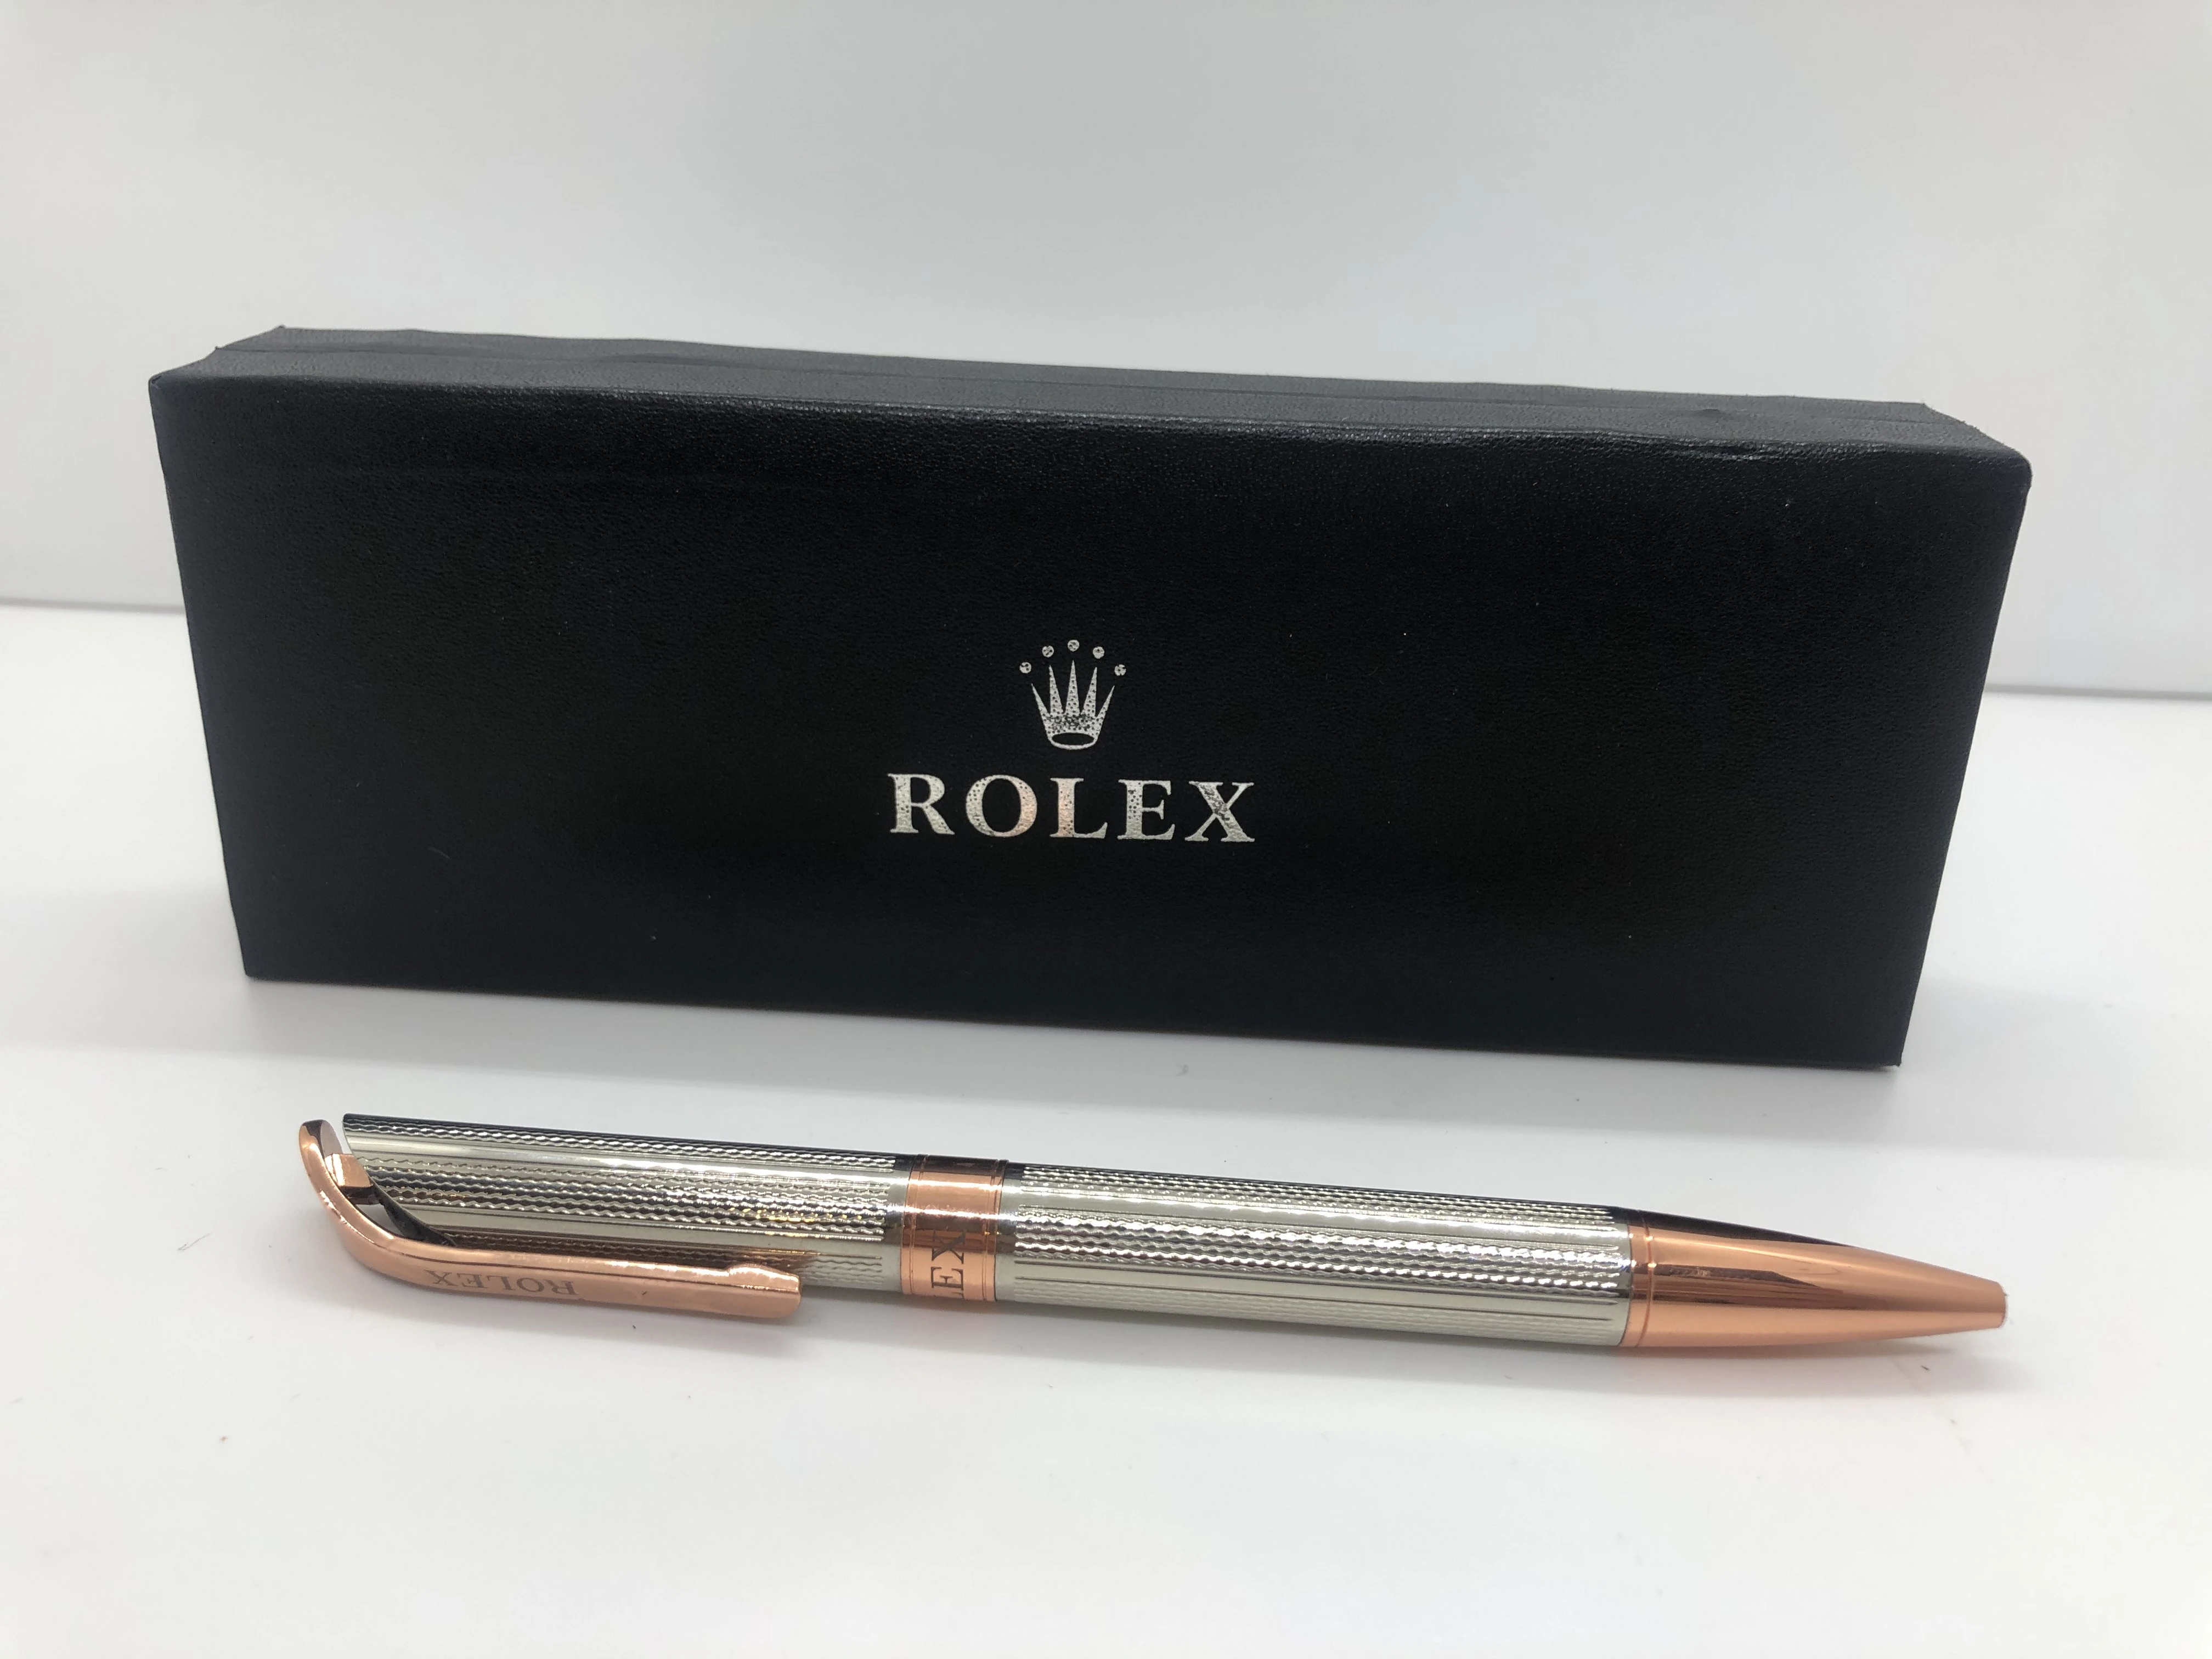 Rolex pen, rose gold * silver - with engraved finishes - with the brand's logo on top and engraved on the rotation and the clasp